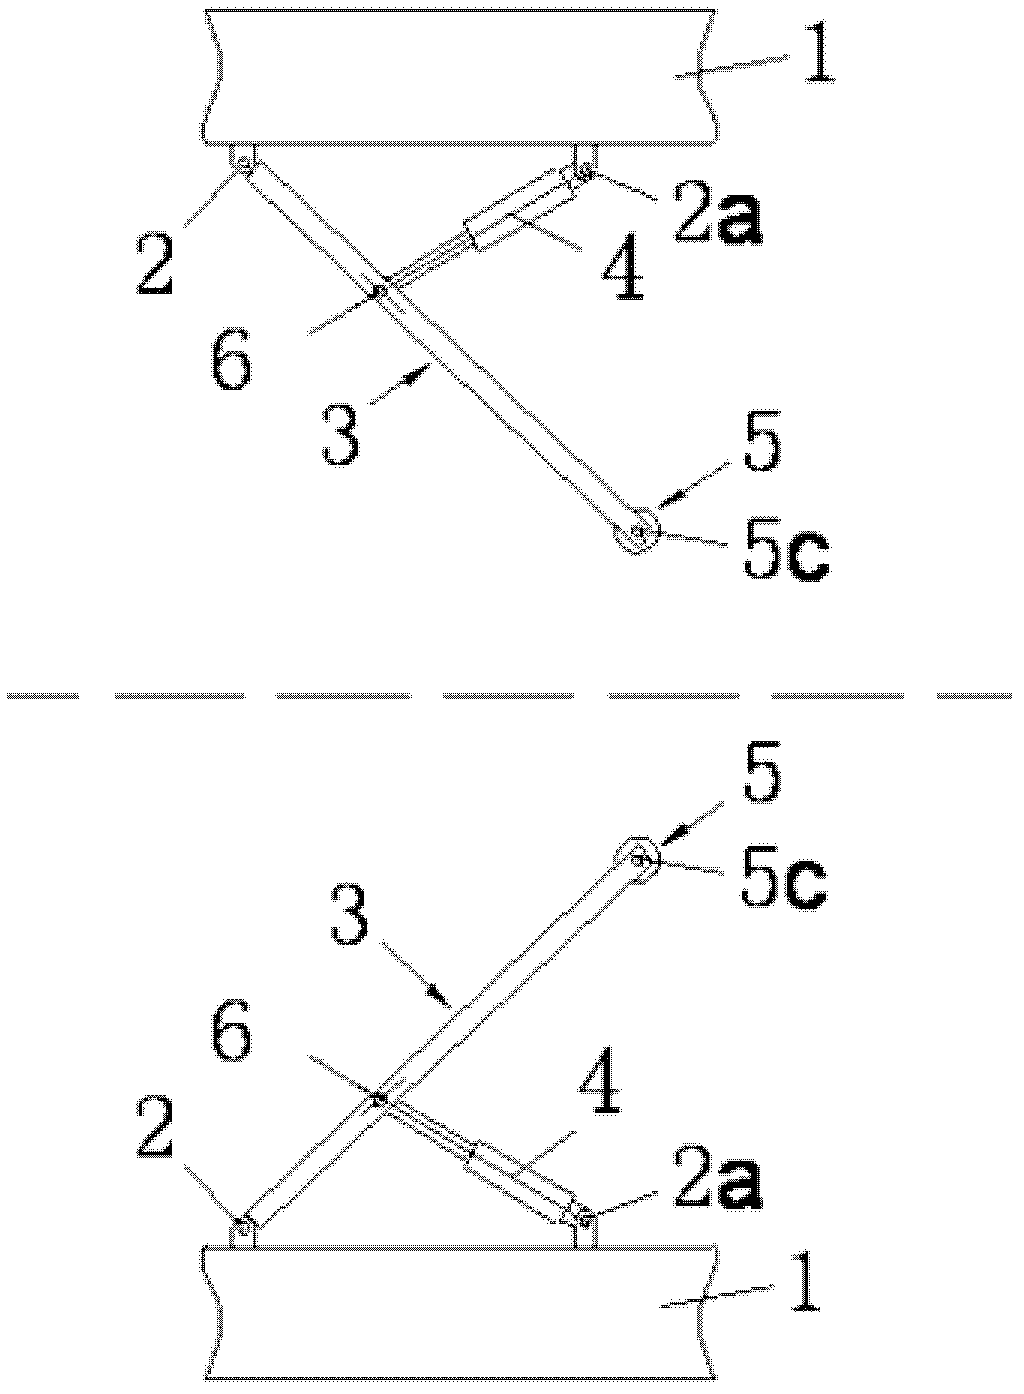 Hydraulic location device for guiding ship in floating dock and working method thereof